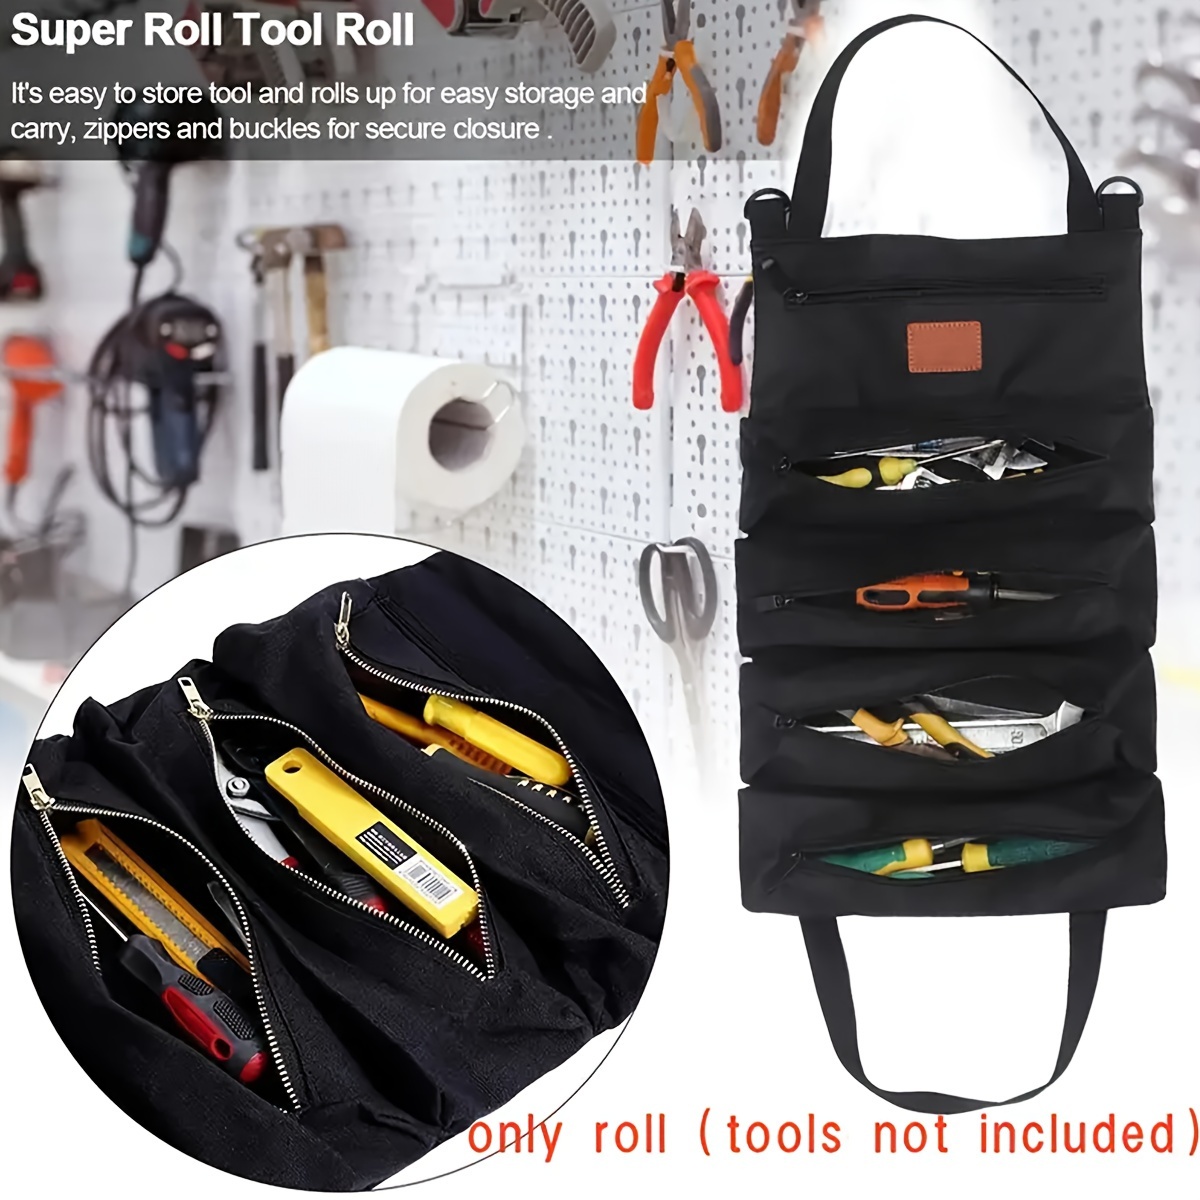 

1 Pc Tool Roll Organizer, Wrench Roll Up Pouch Bag With 5 Zipper Pockets Canvas Tool Roll, 16 Oz Canvas Wrench Tool Organizer For Electrician